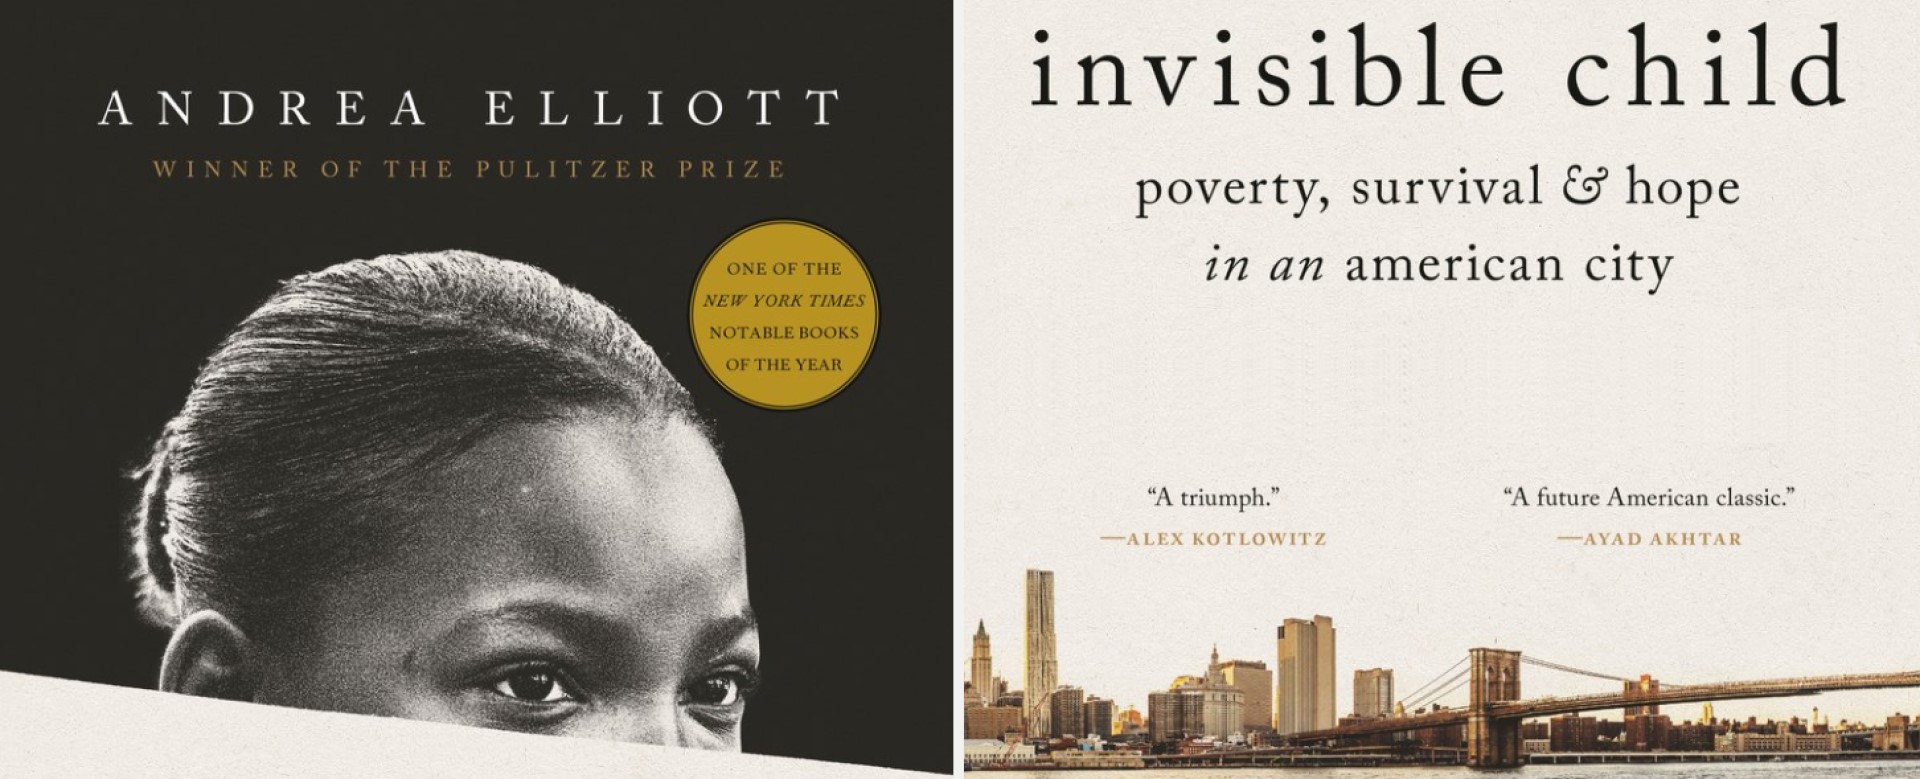 Revisiting an “Invisible Child” that Made Poverty Human